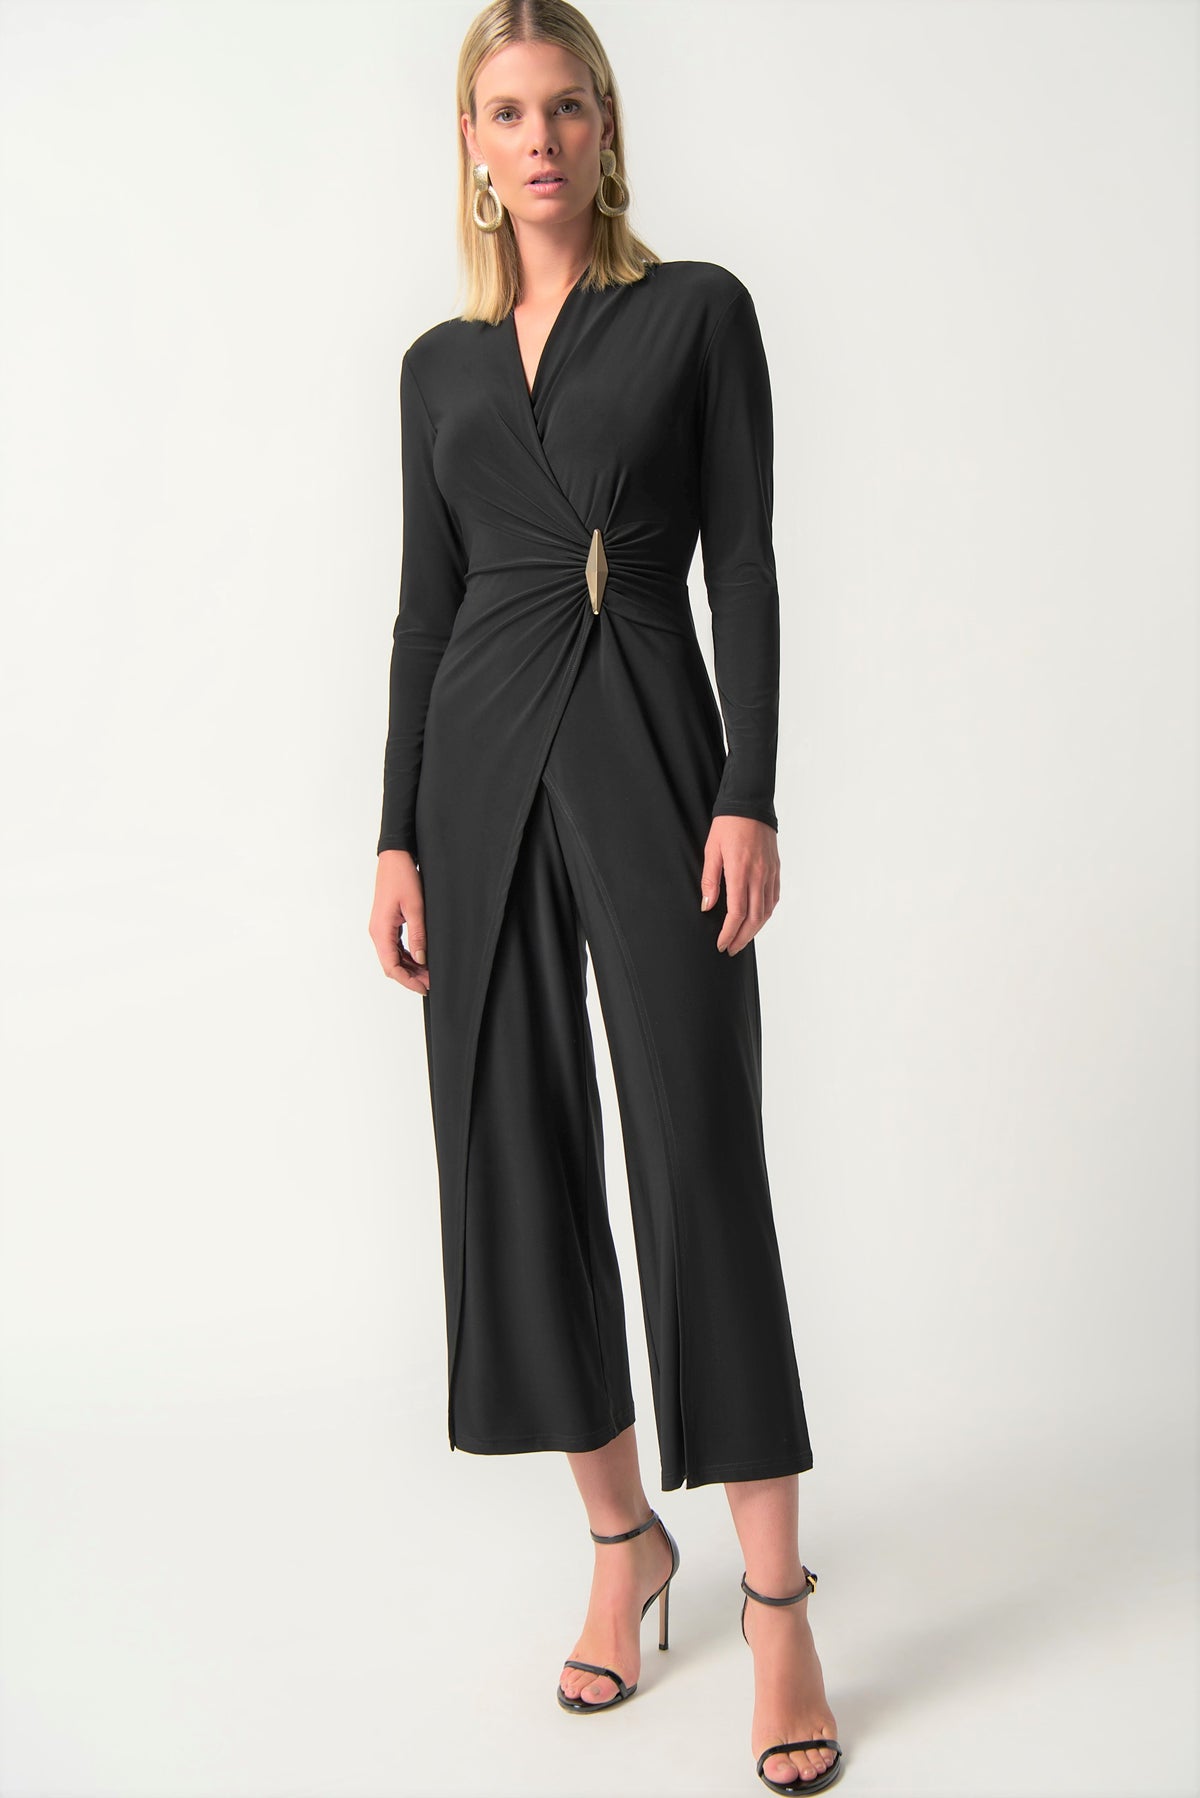 Crochet Print Jumpsuit by Temperley London for $199